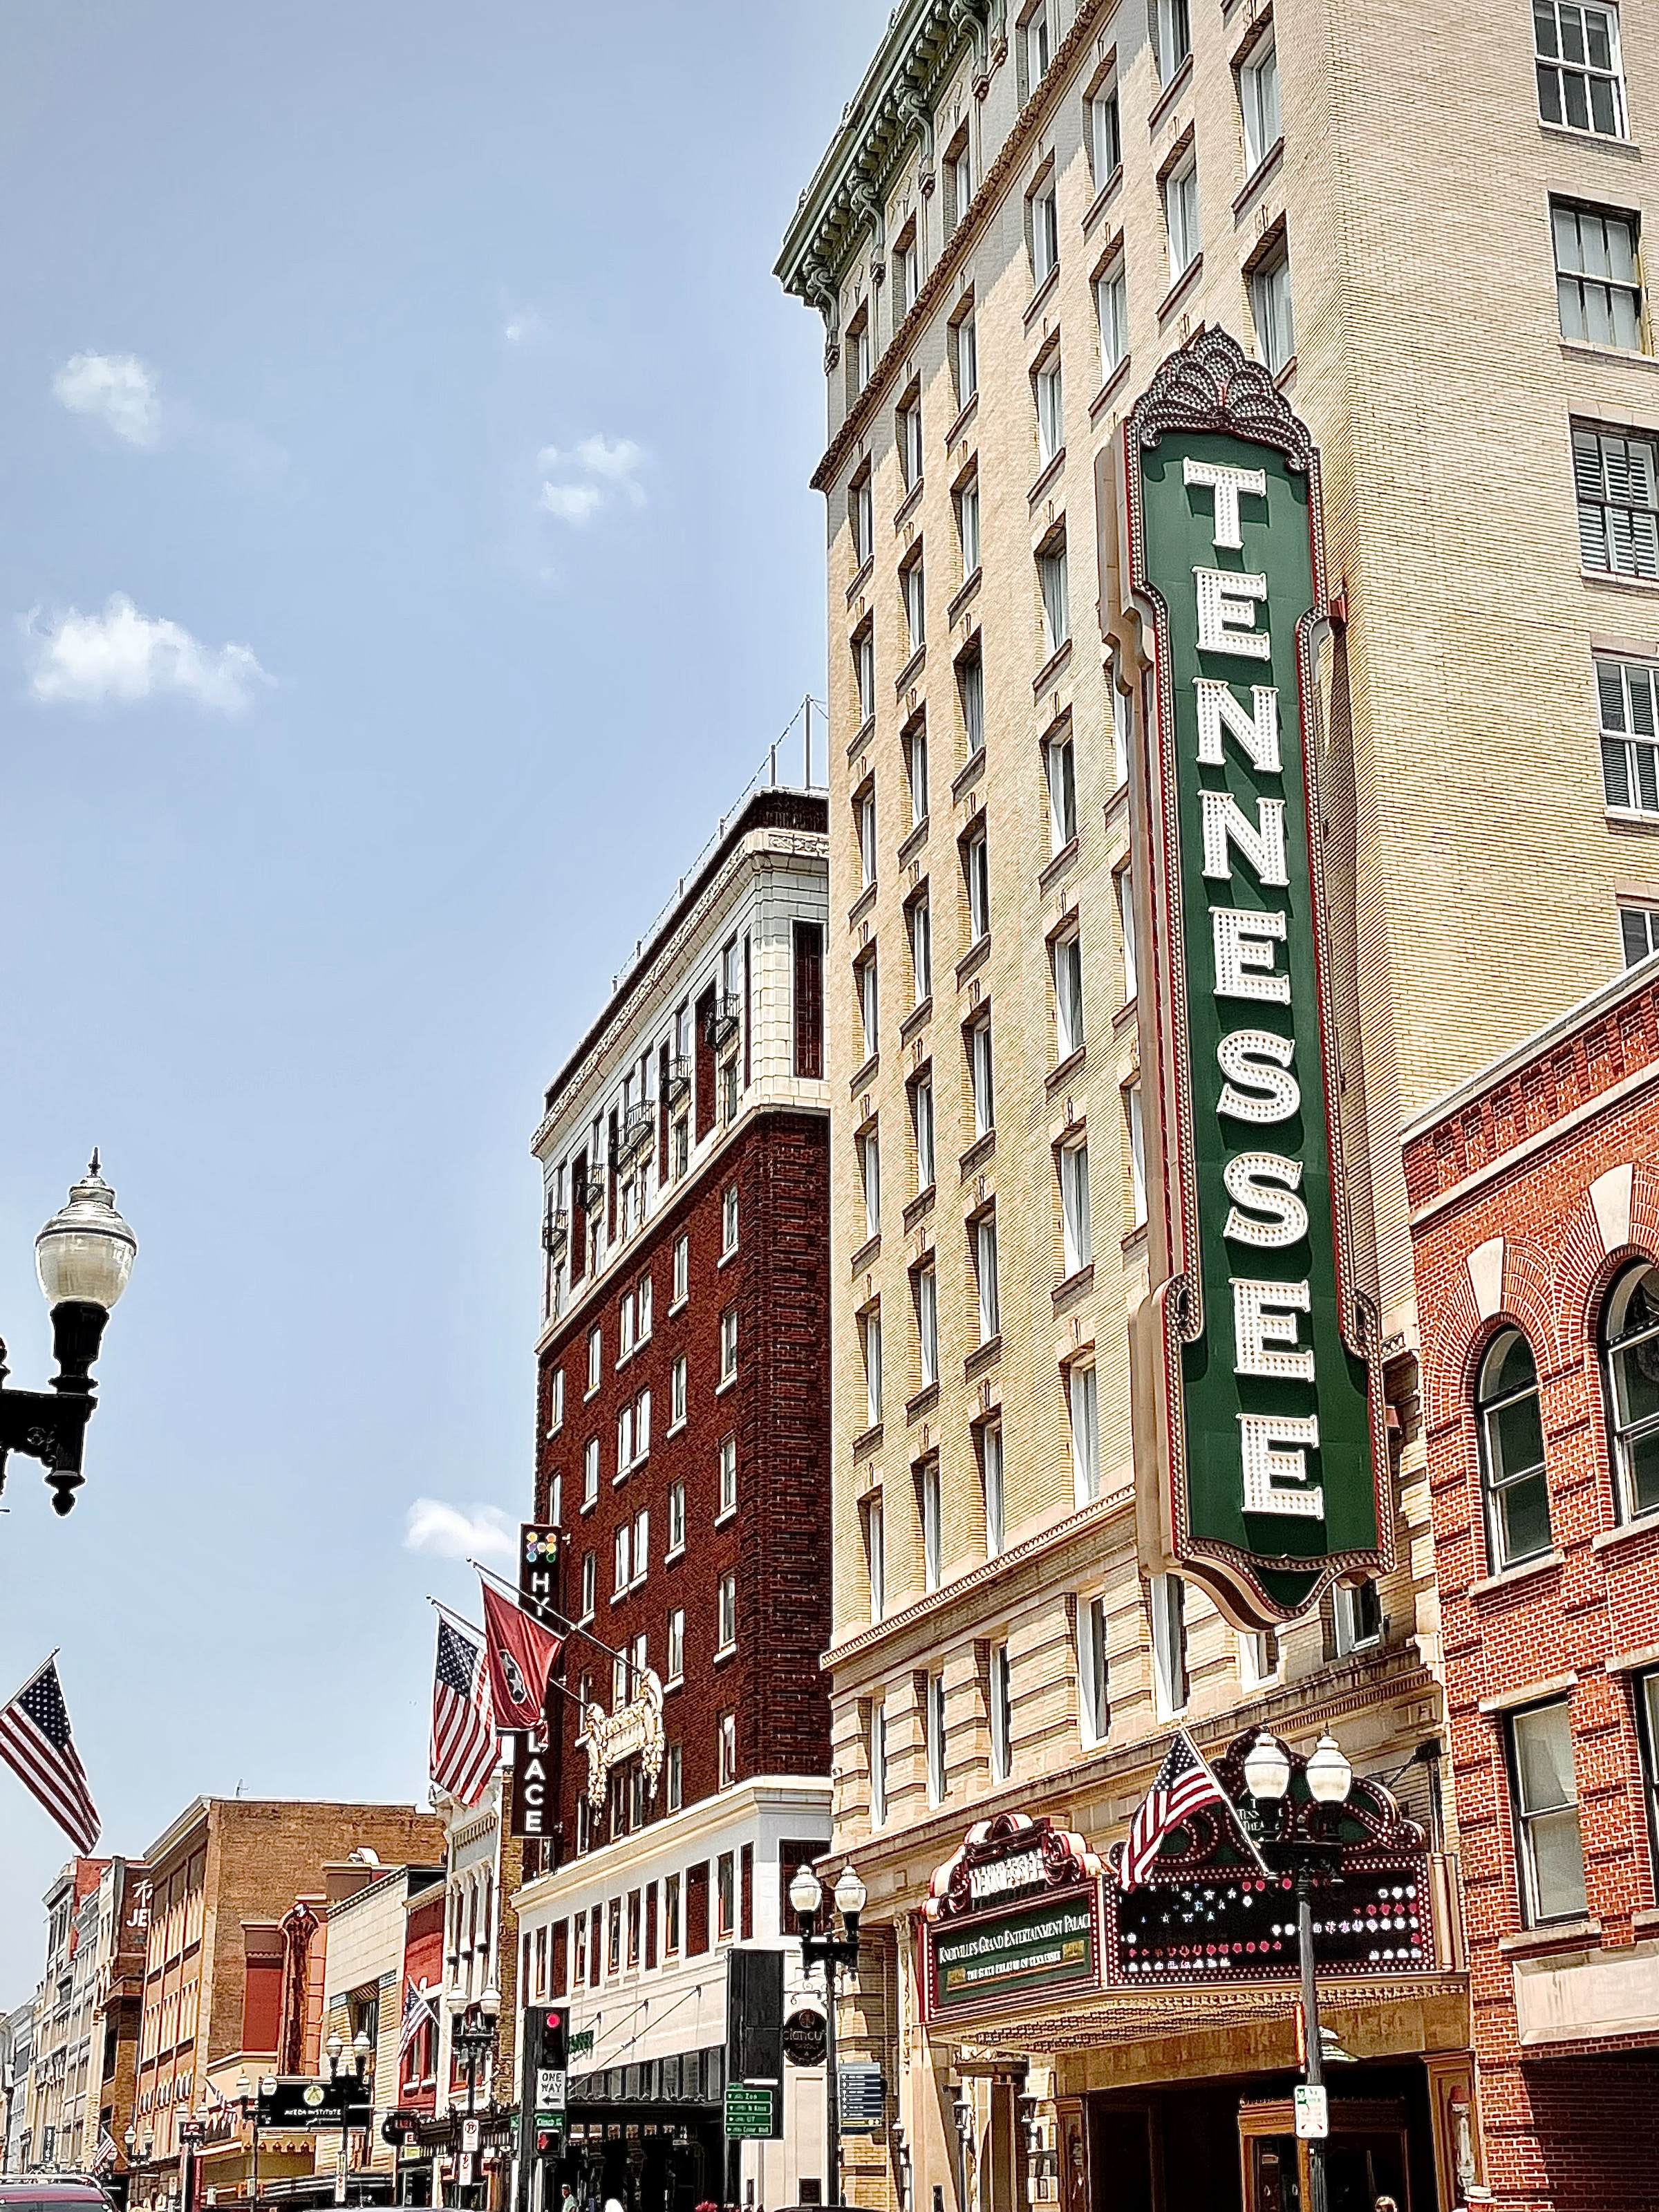 Concrete urban building with green Tennessee sign